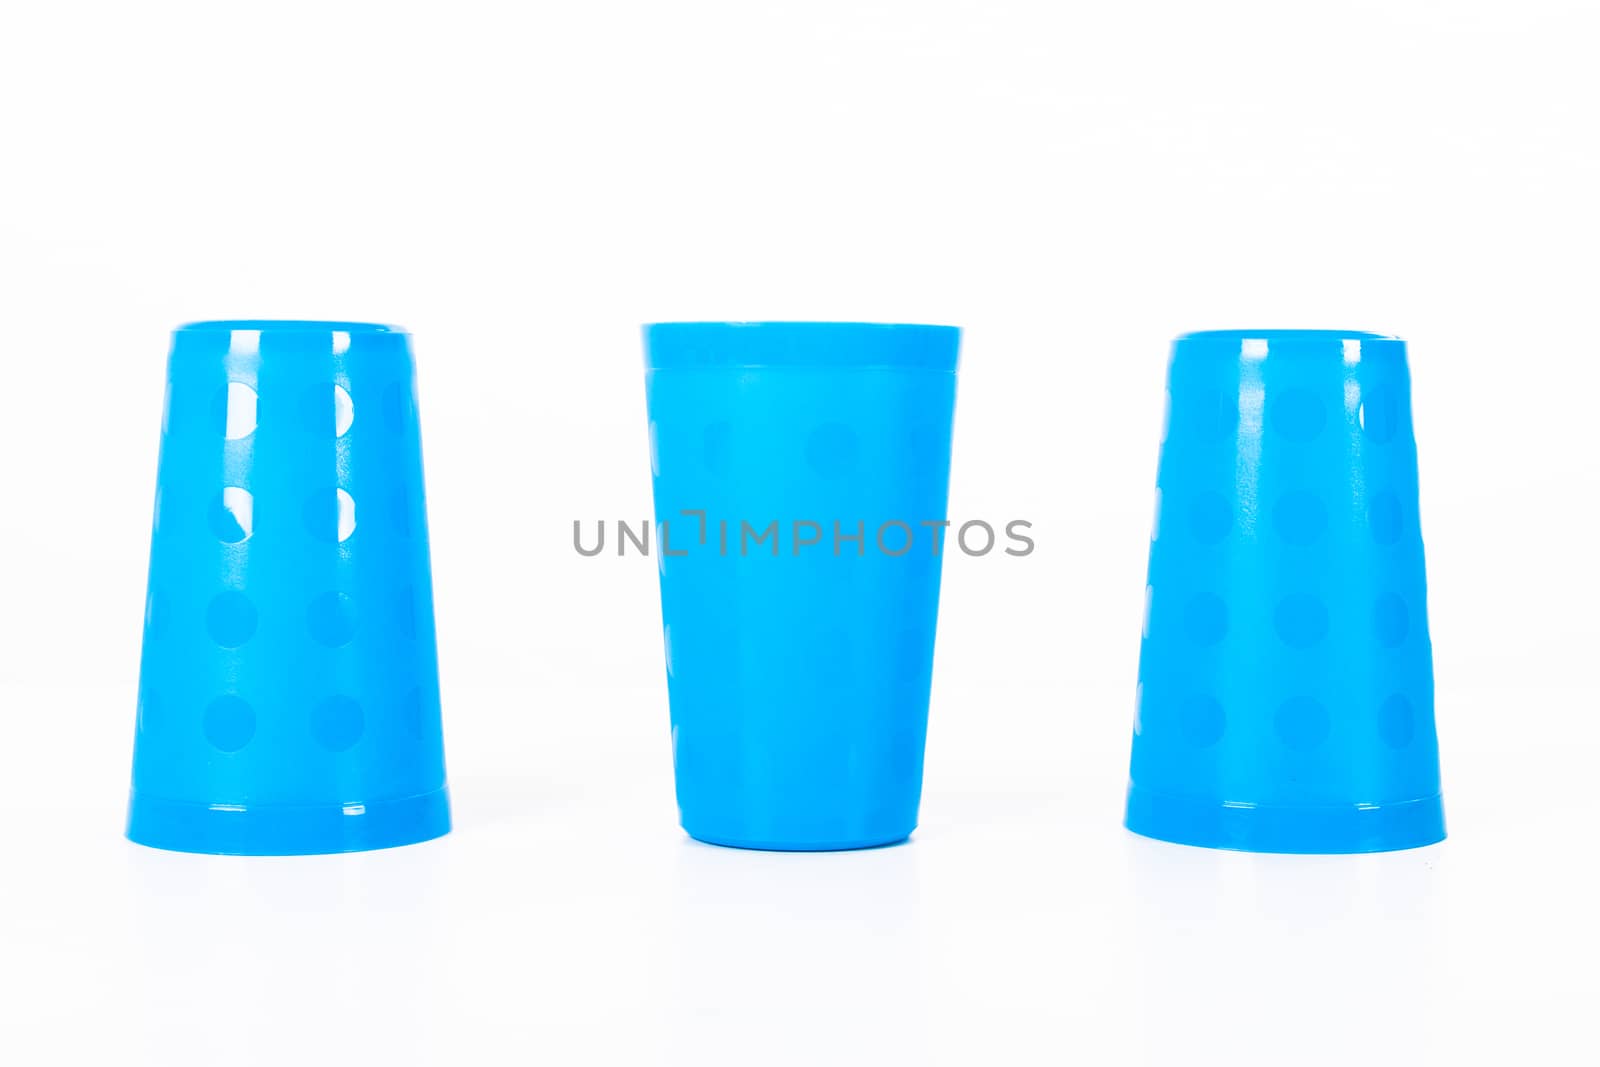 Thimblerig with three plastic glasses, isolated on white background.